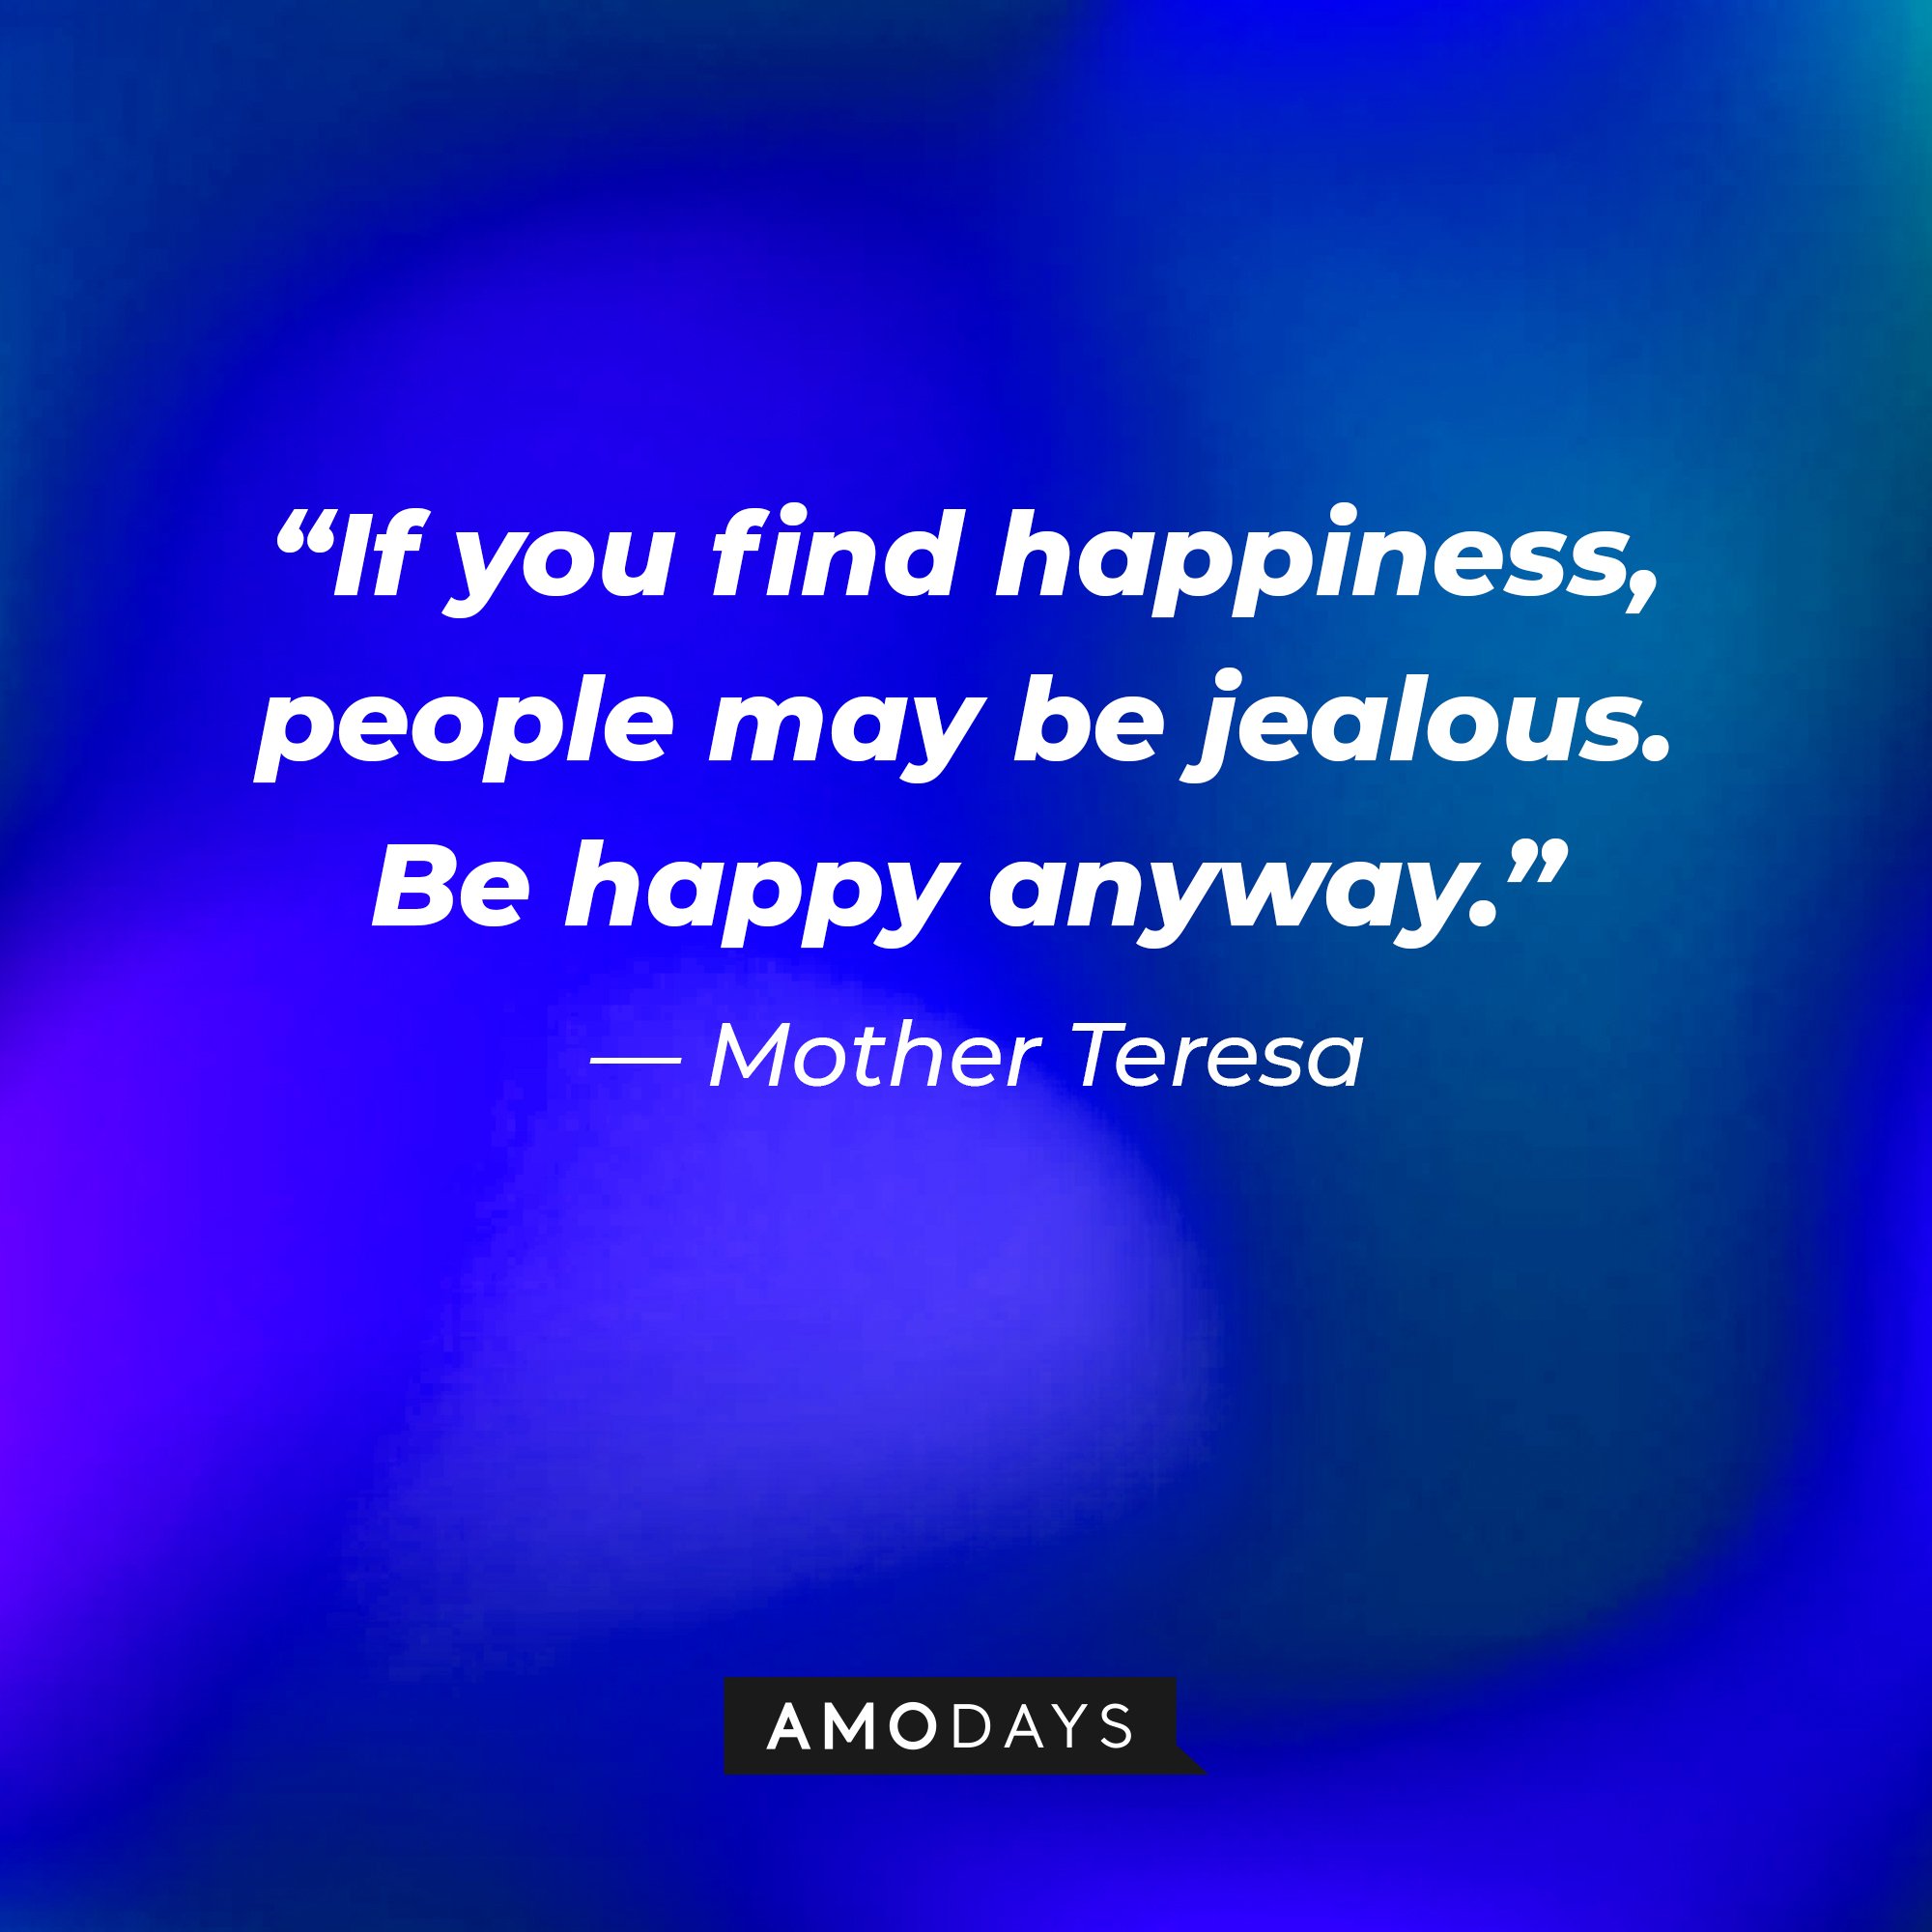  Mother Teresa's quote: “If you find happiness, people may be jealous. Be happy anyway.” | Image: AmoDays